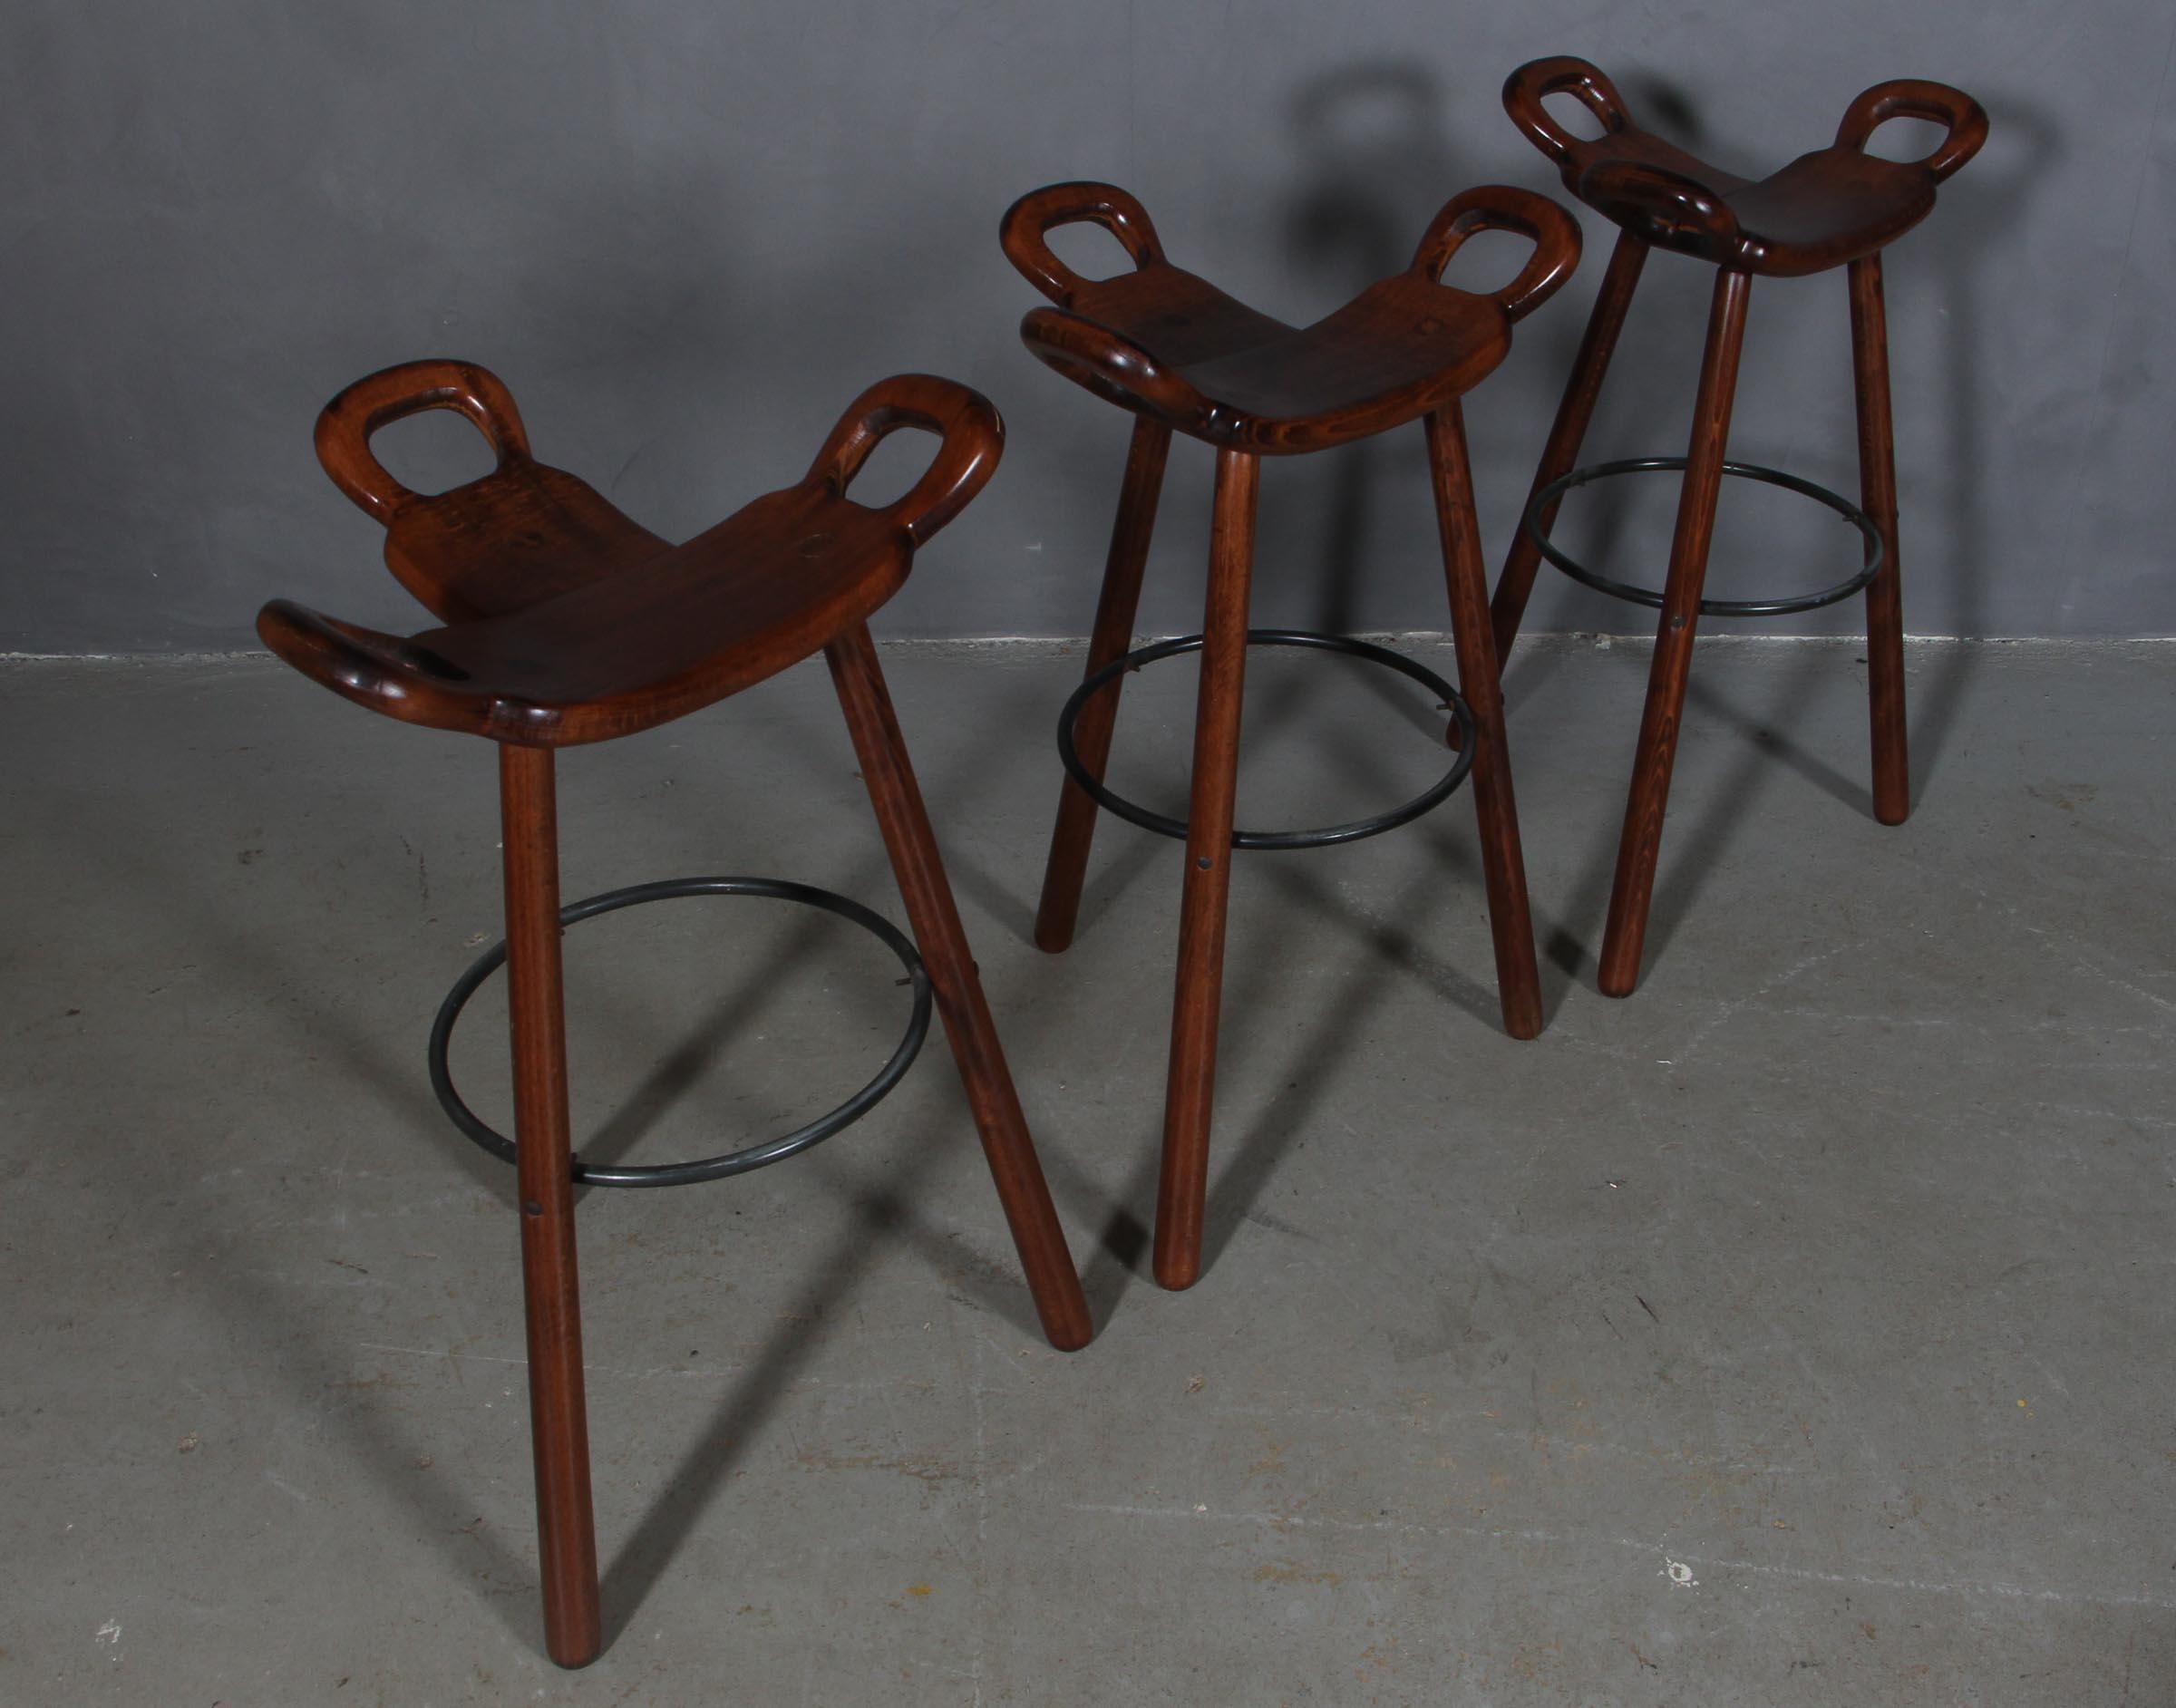 Spanish Brutalist Marbella bar stools by Sergio Rodrigues for Confonorm, 1970s, Set of Three. Beautiful. warm color. Lovely set. solid wood.
